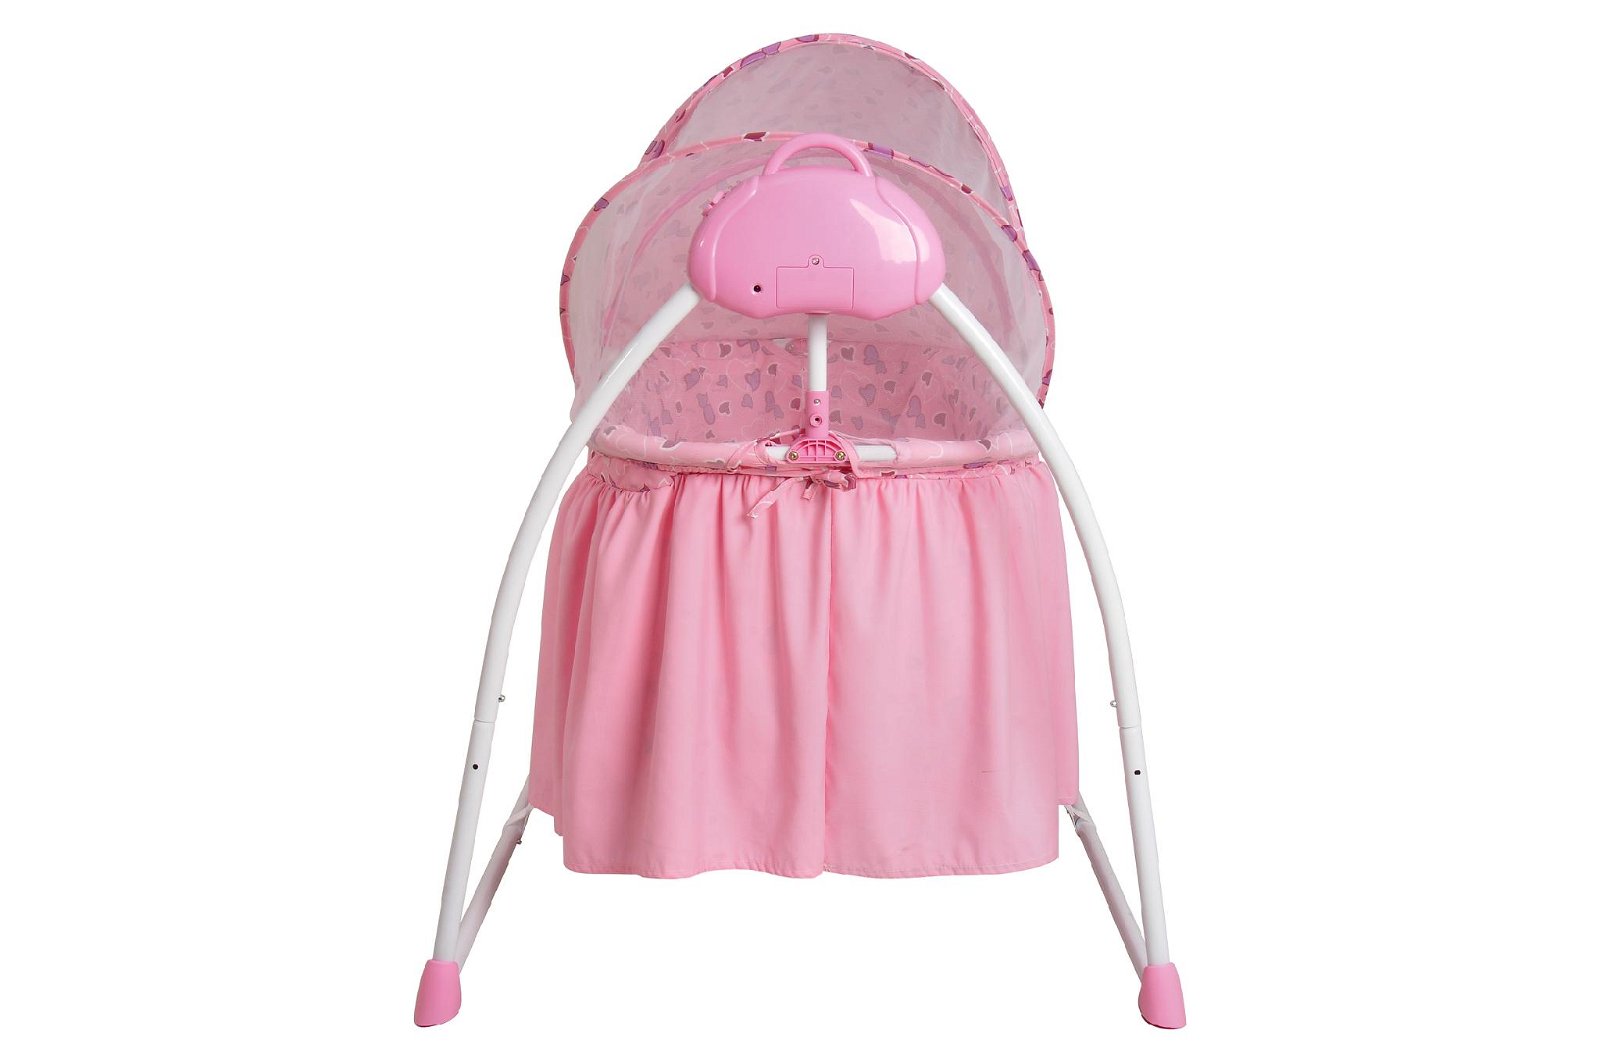 Multi-function baby rocking bed swing cradle with mosquito net 2